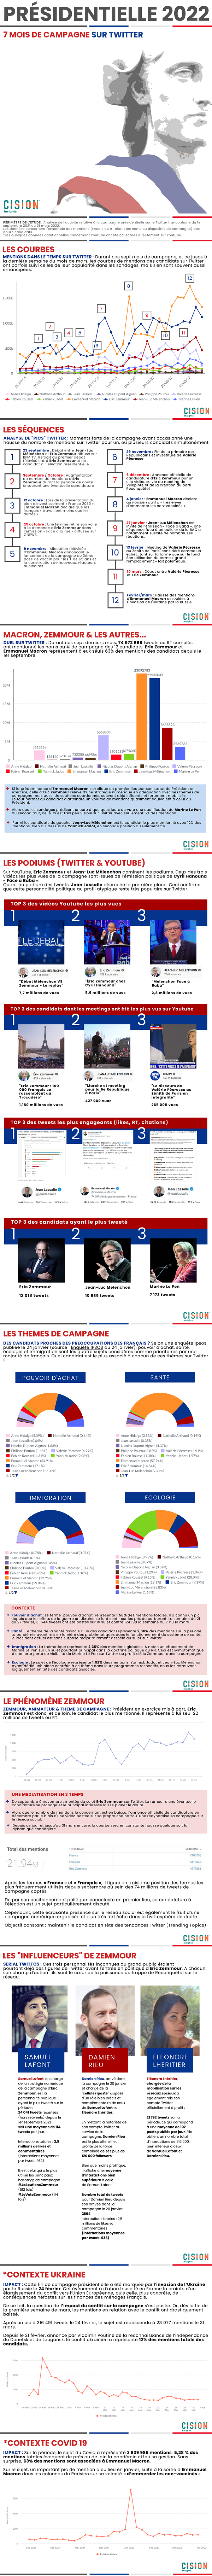 Infographie-Presidentielles2022-7moisdecampagnesurTwiter.png